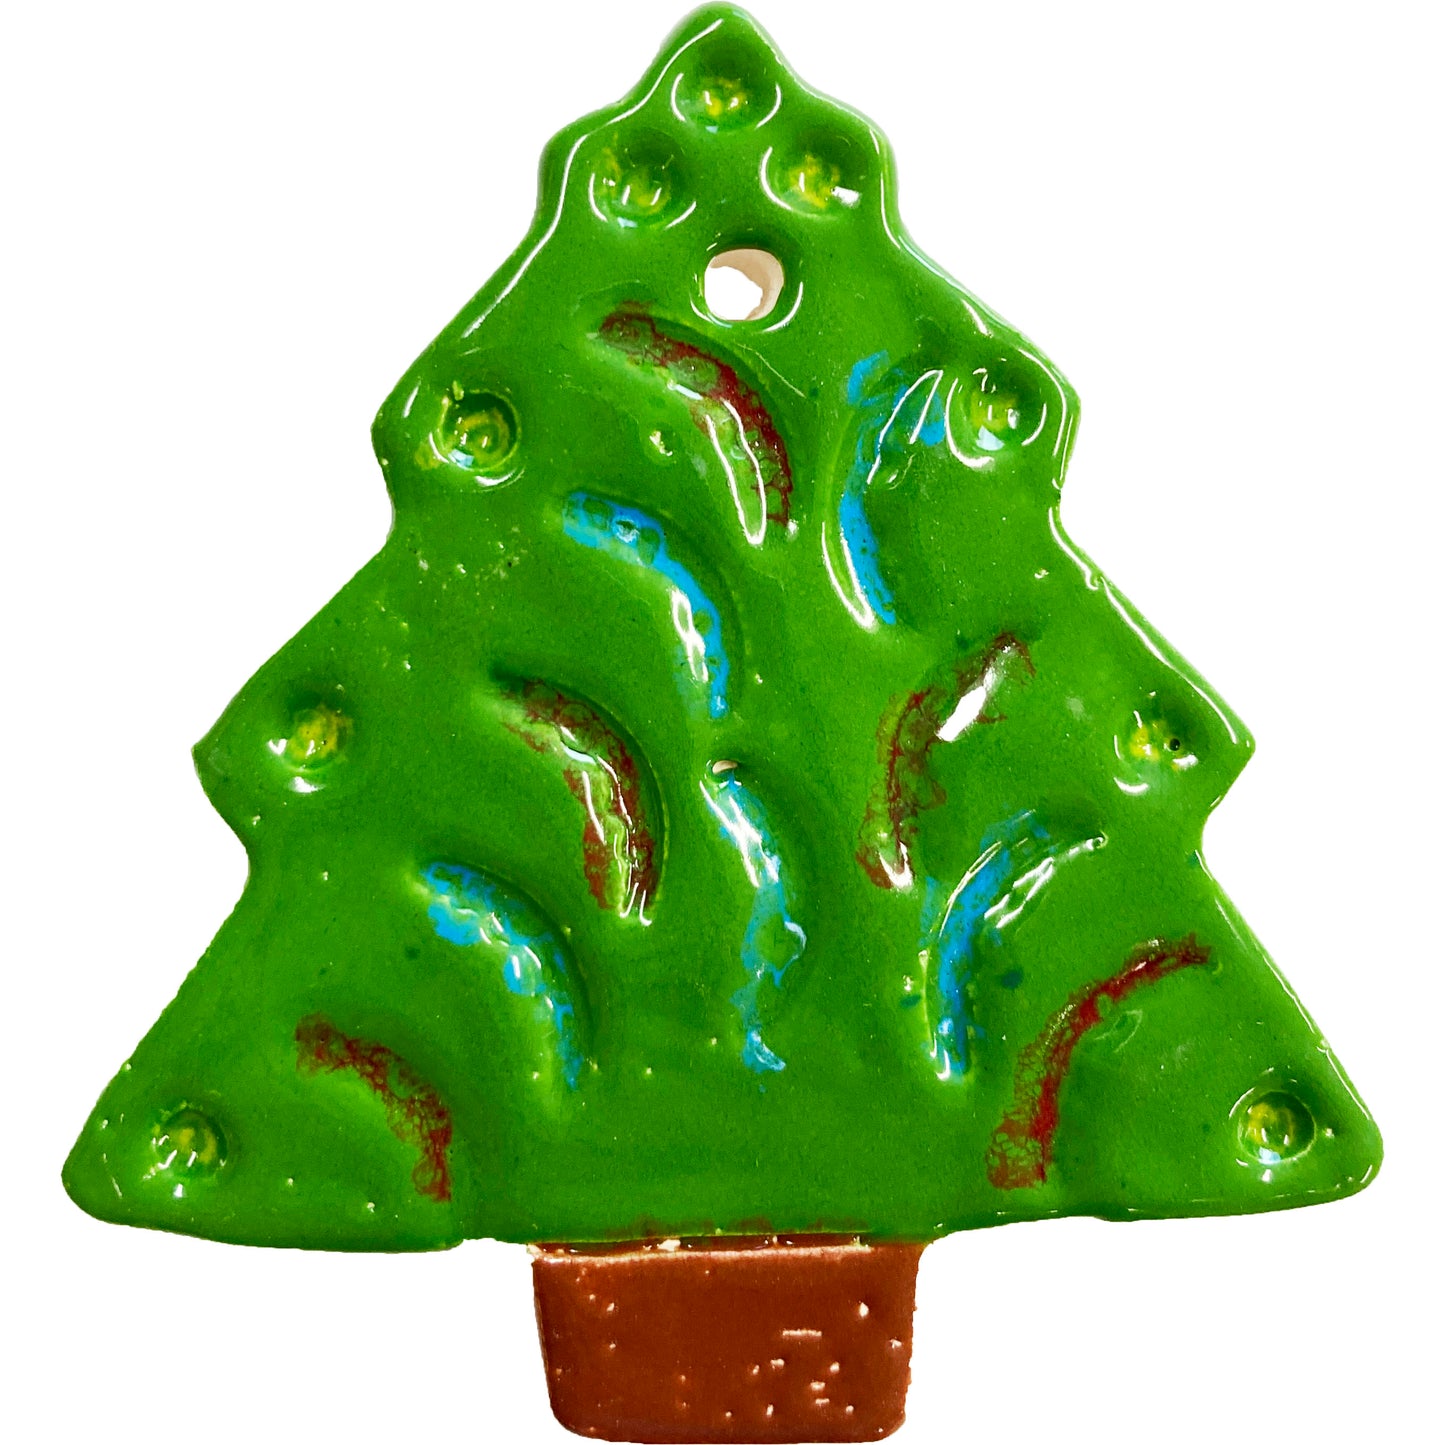 WATCH Resources Art Guild - Ceramic Arts Handmade Clay Crafts Glazed 3.5-inch x 3-inch Christmas Tree Ornament by Alec Lopez and Janice Stephens